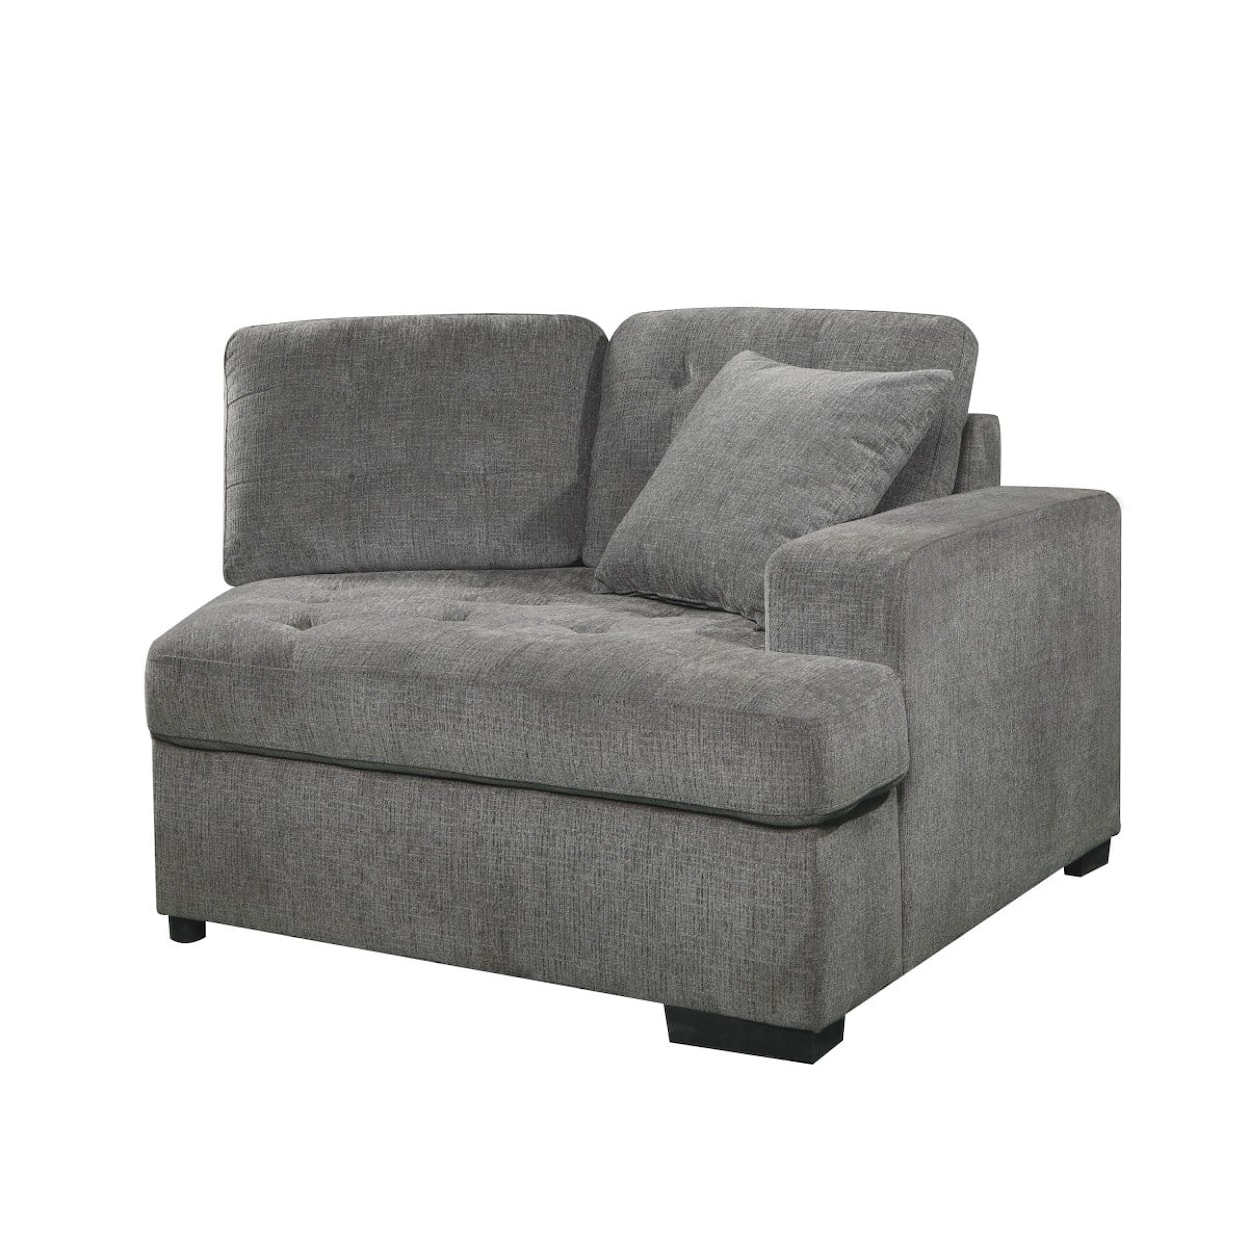 Homelegance Logansport 2-Piece Sectional with Pull-out Ottoman